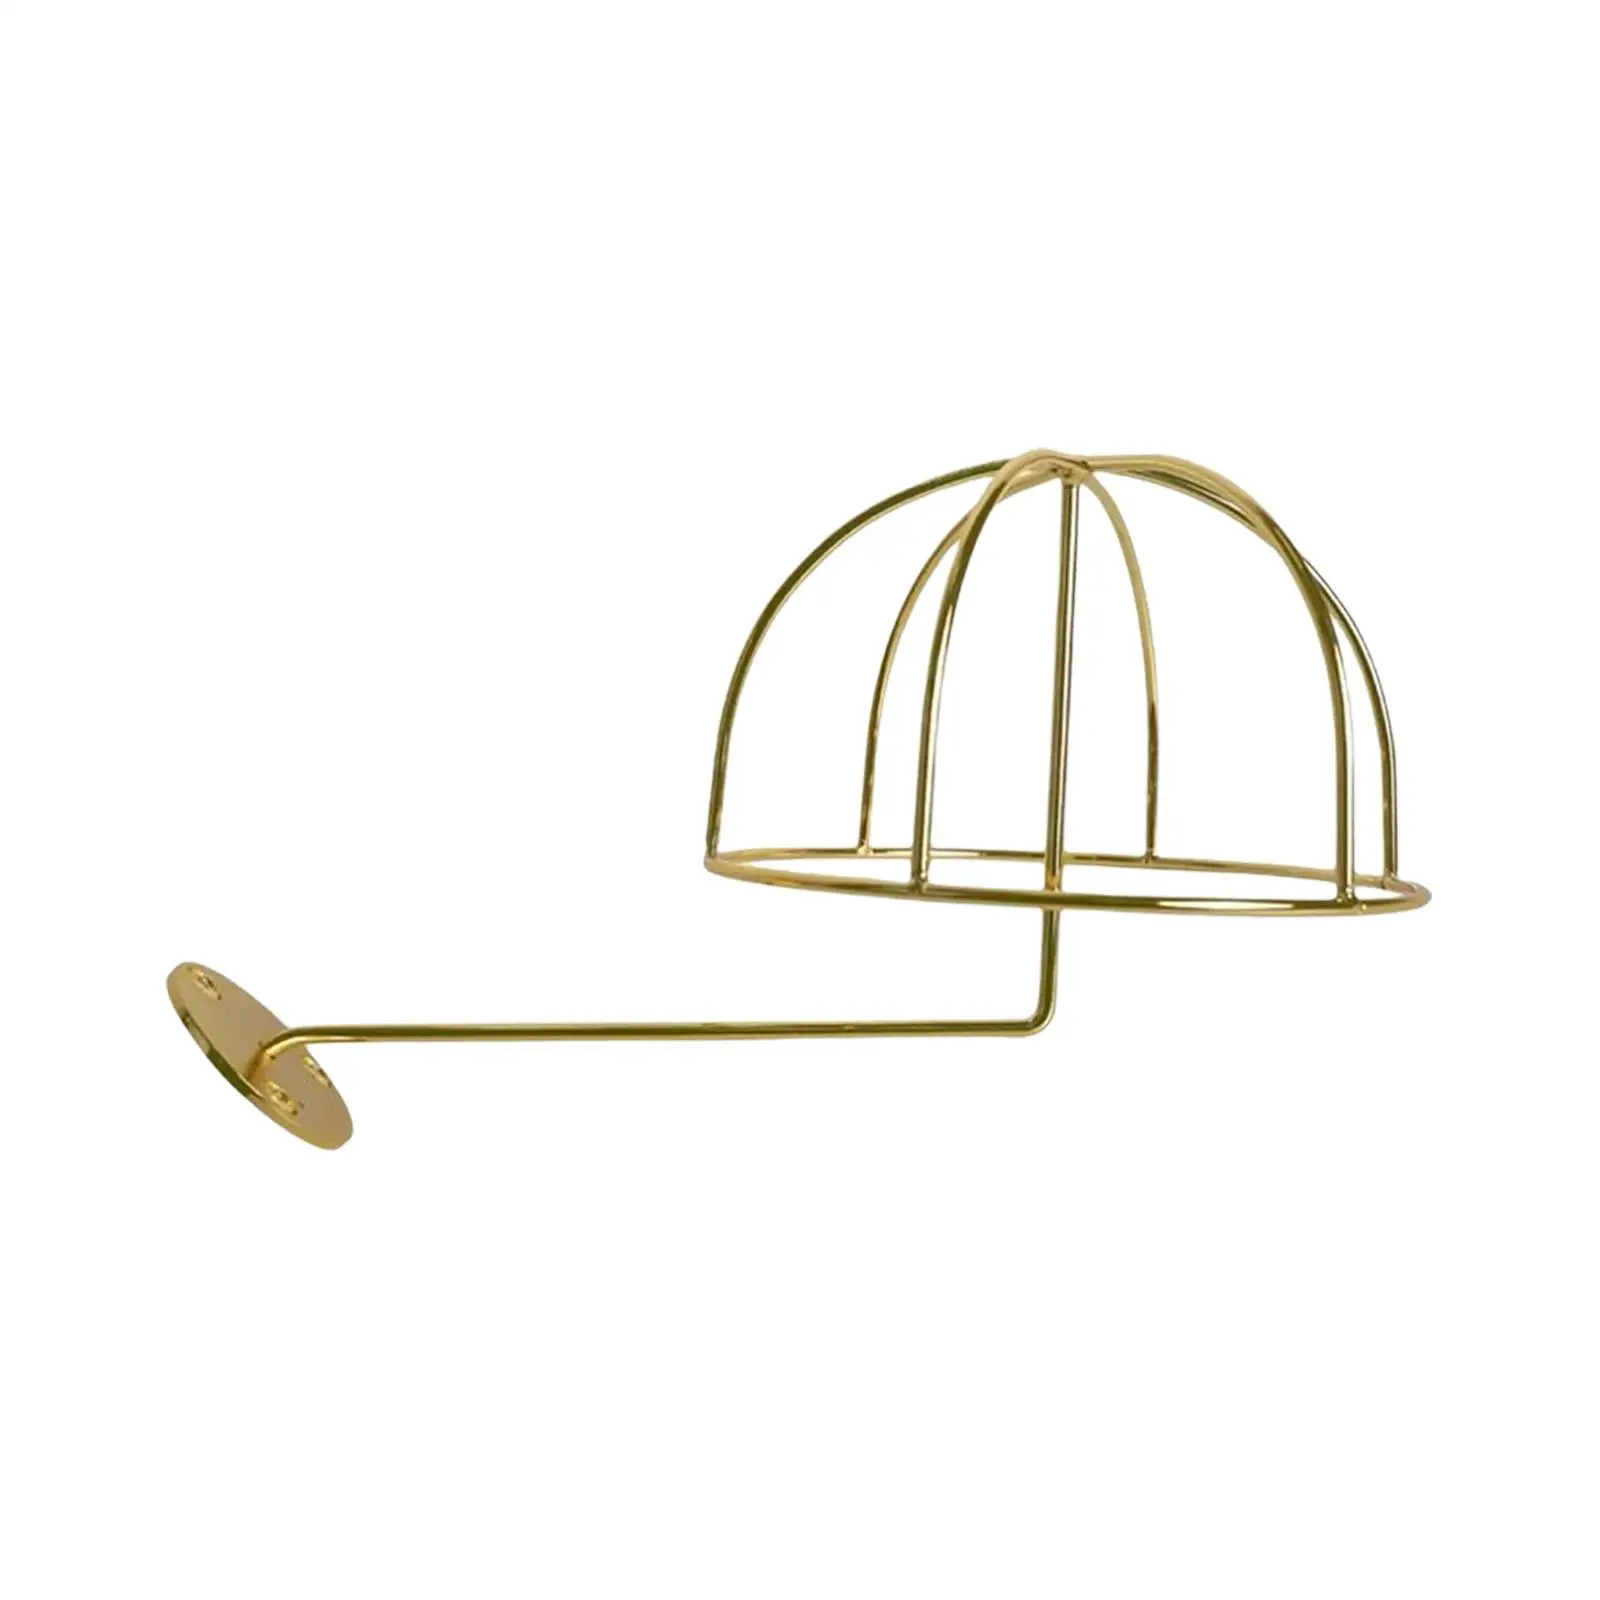 Metal Wire Hat Holder Wall Mounted Hat Rack Mounting On Doors, Closet Rods, Walls, Anywhere for Storing Hats, and Other Headgear